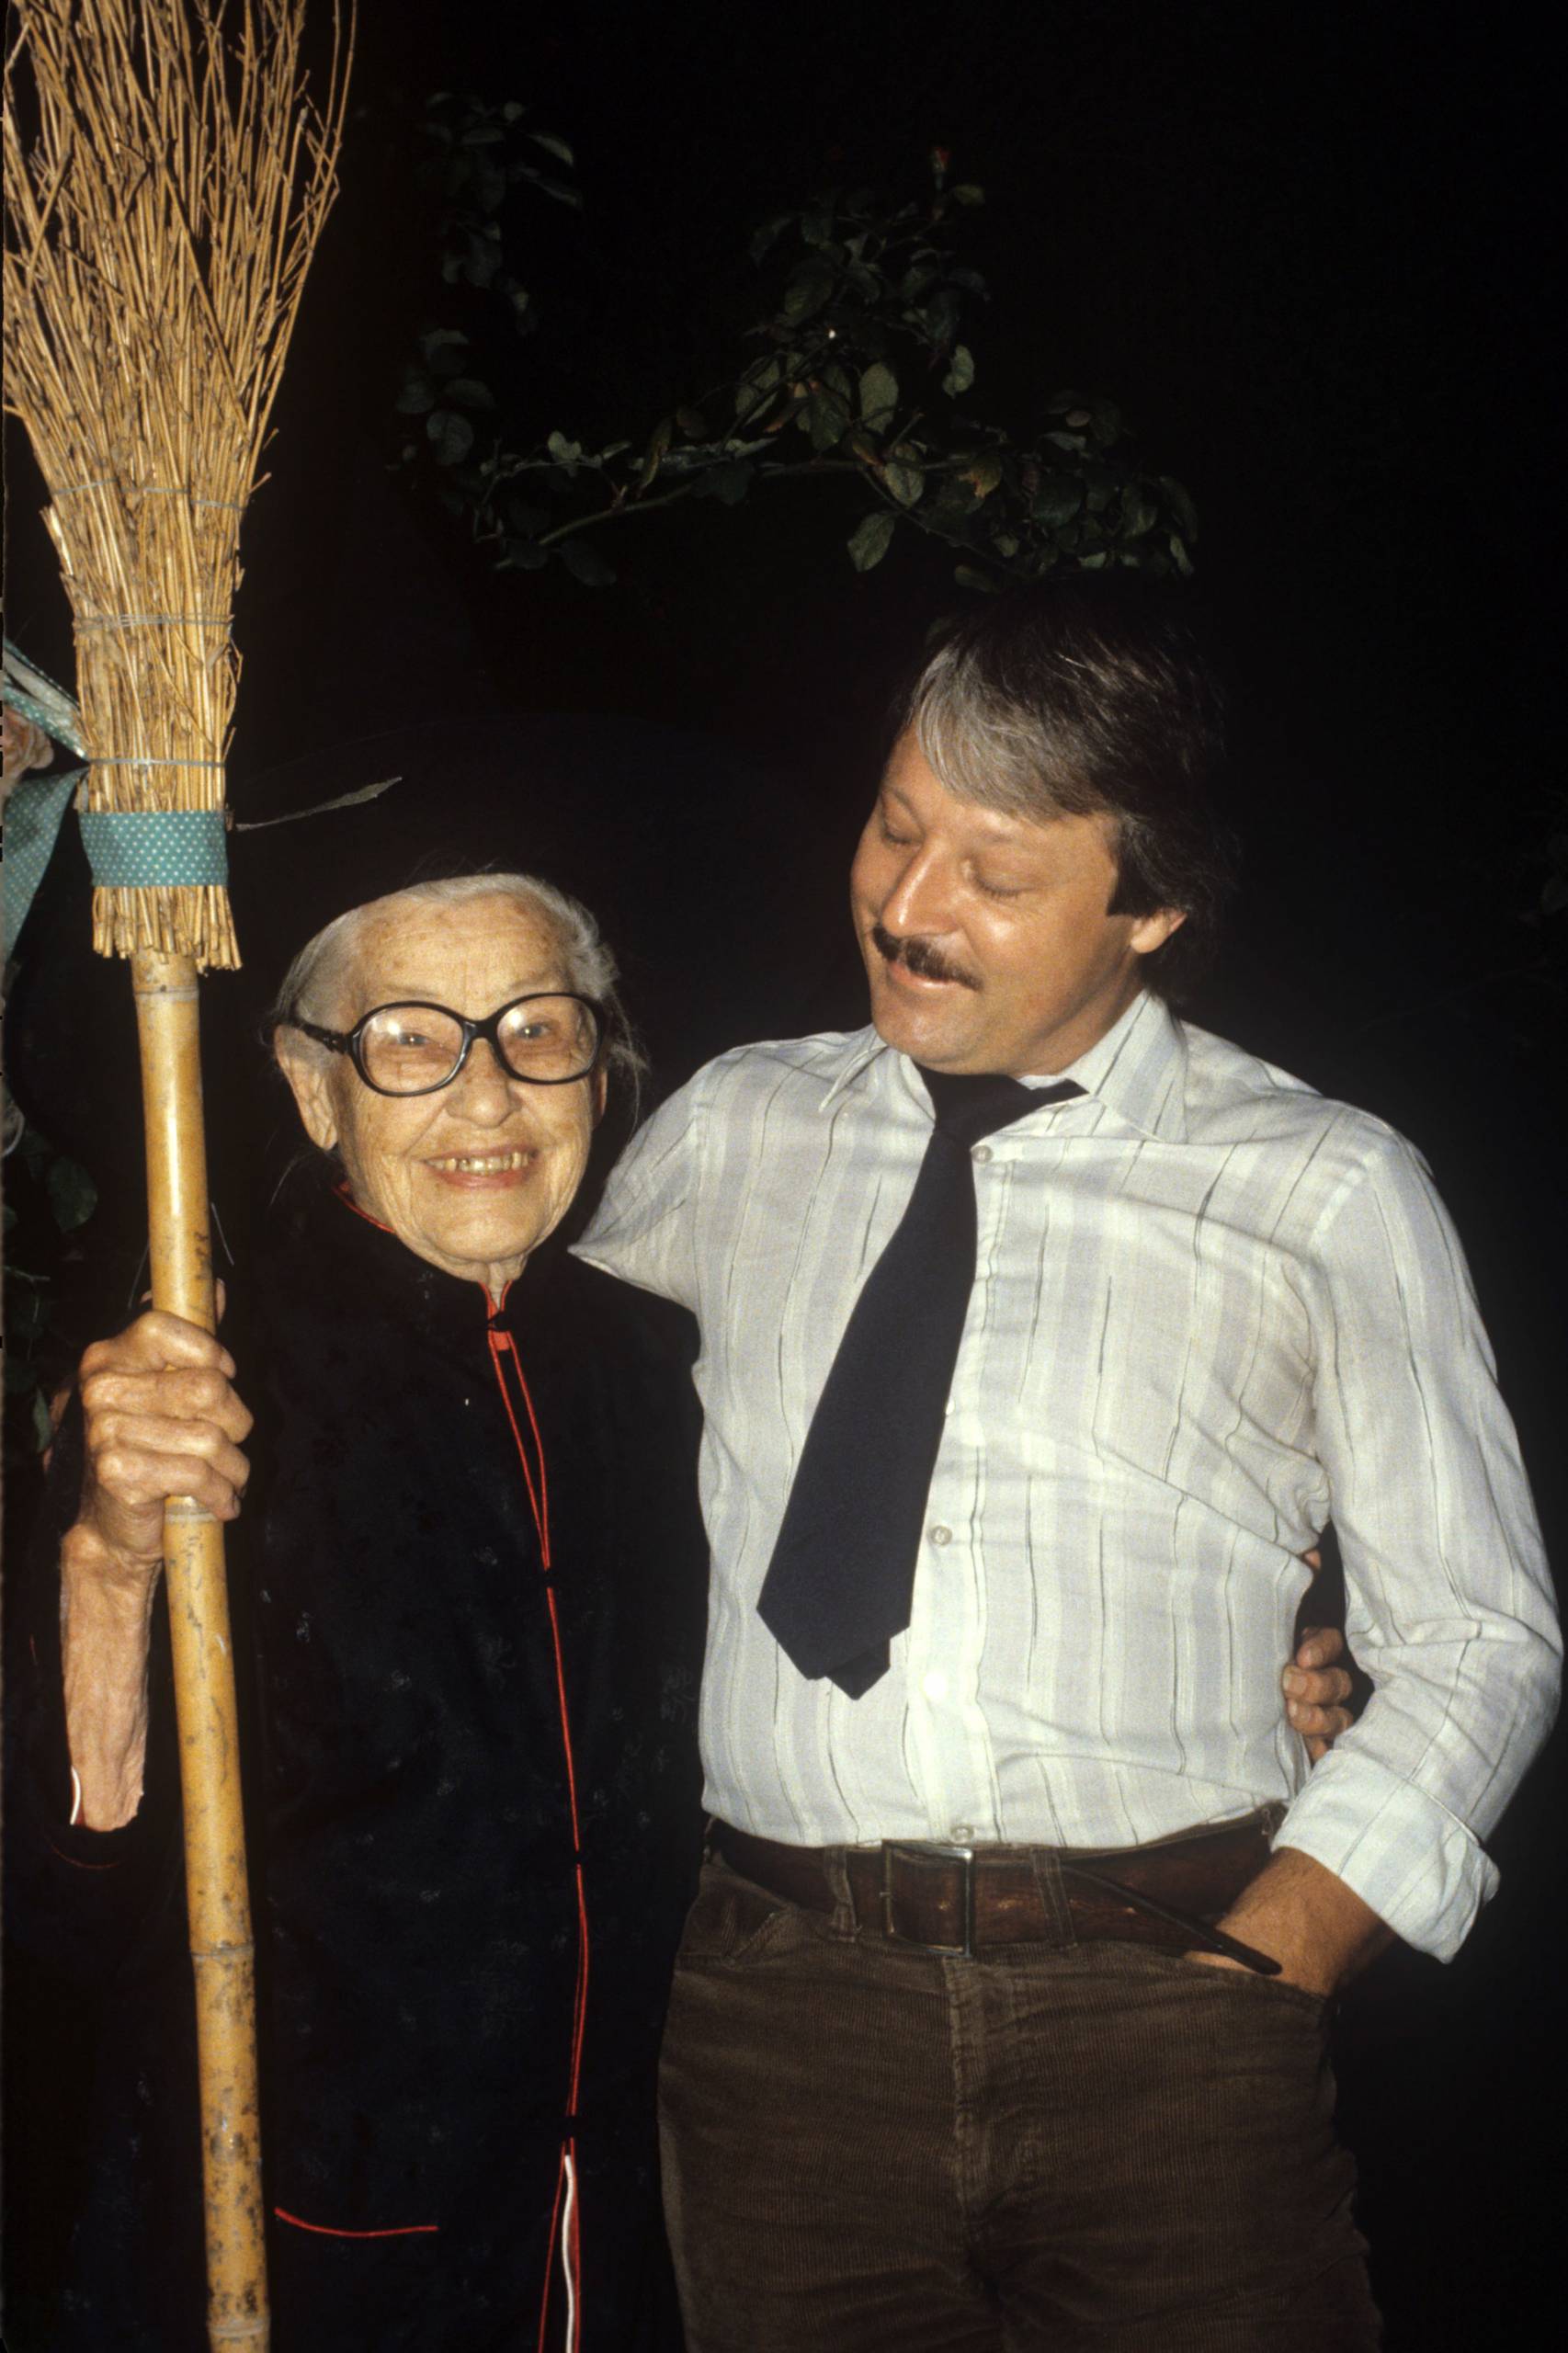 A posed photo of an older woman in a witch costume holding a broom. Next to her is a younger man with a mustache looks down fondly at the woman.